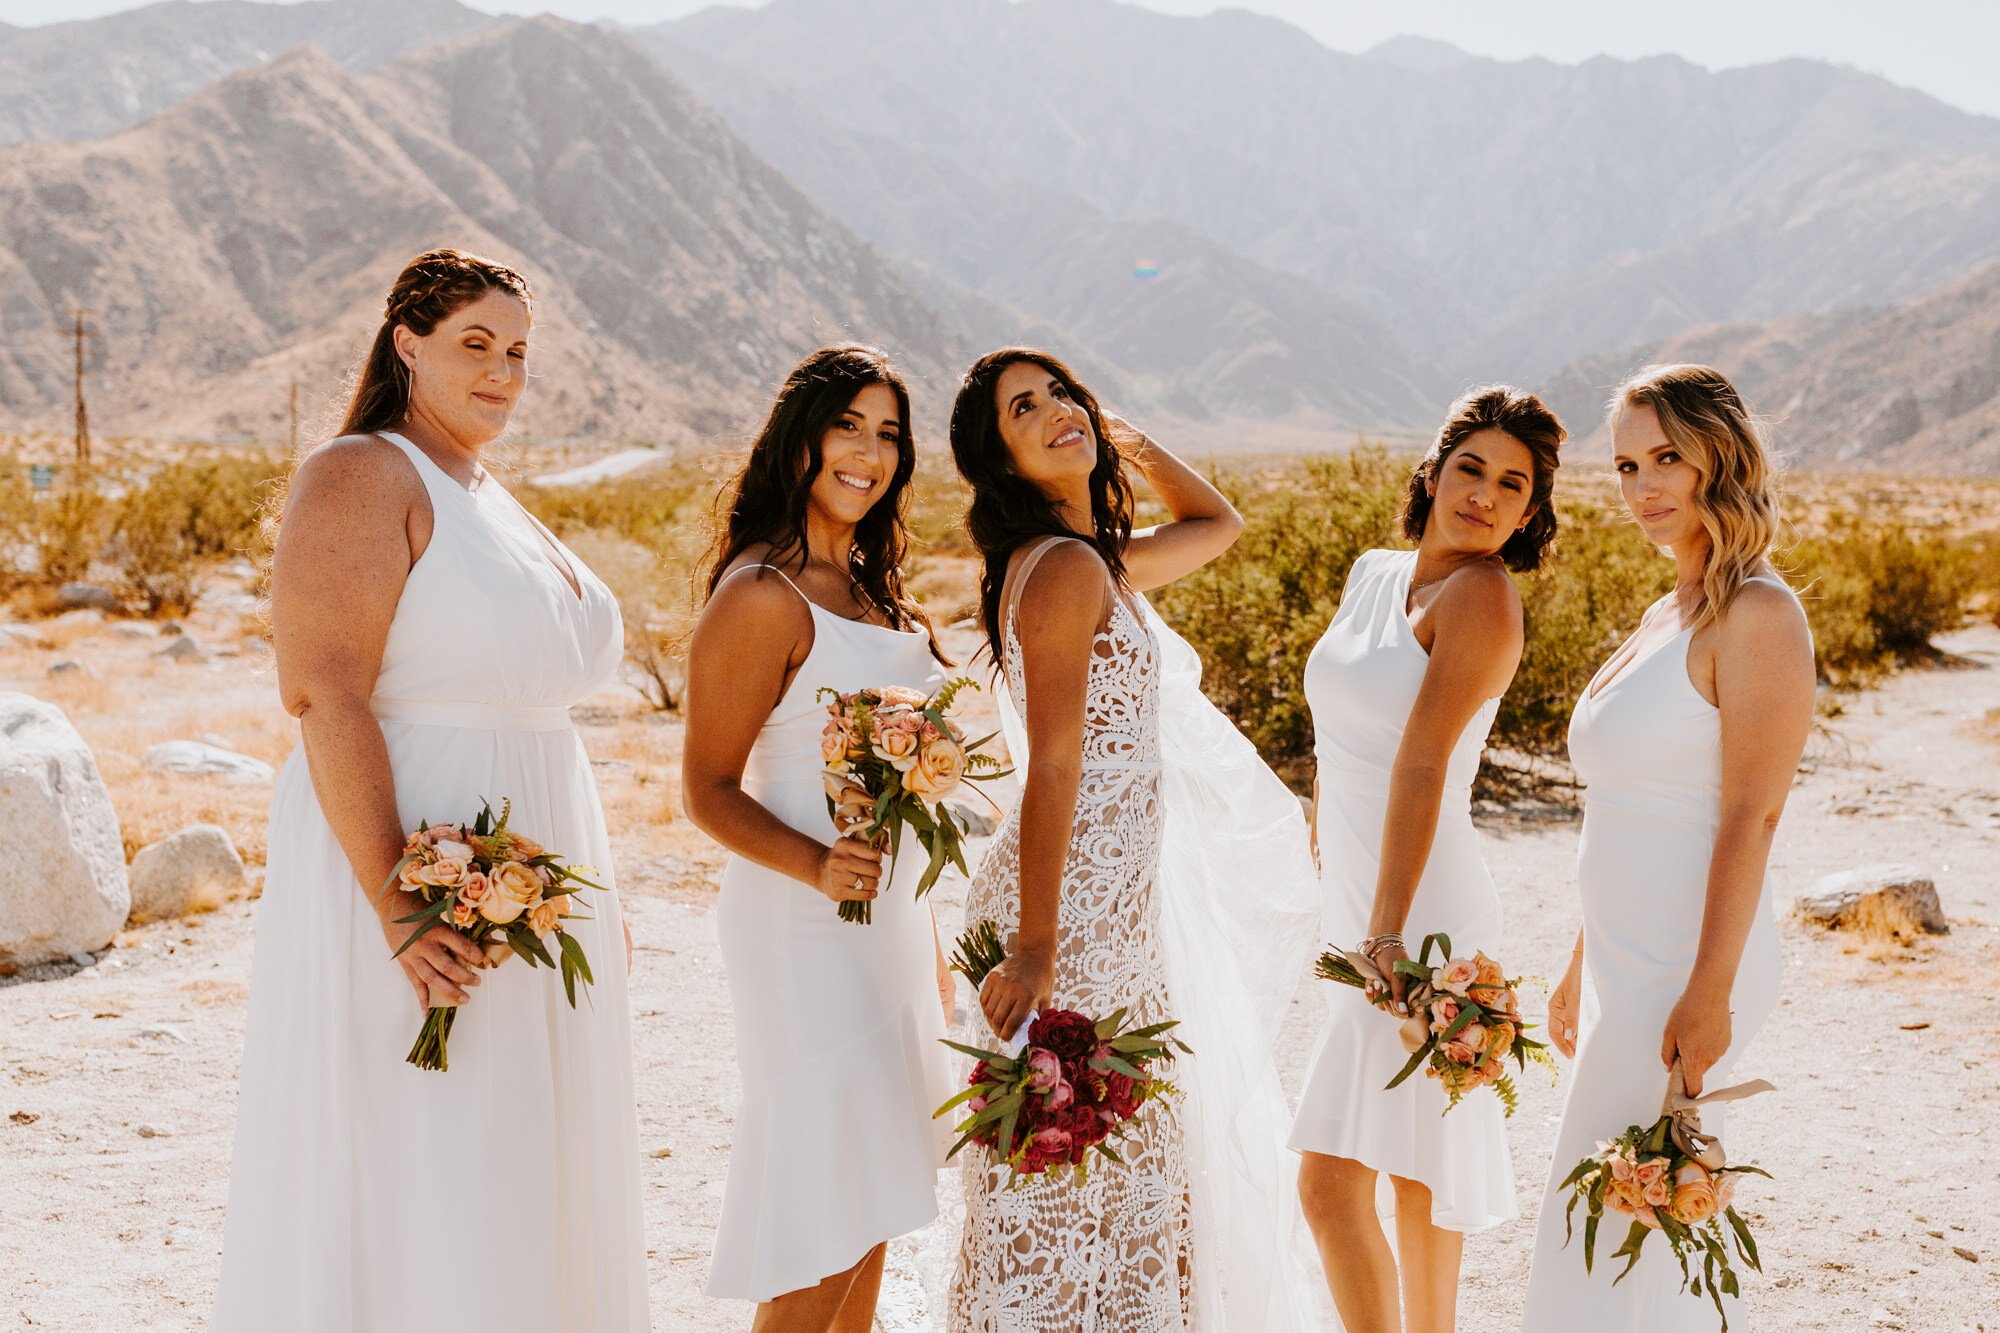 All white bridesmaid dress inspiration | Desert Palm Springs Bridesmaid Photo | Avalon Hotel and Bugalows | Palm Springs Wedding Photographer | Tida Svy Photography | www.tidasvy.com